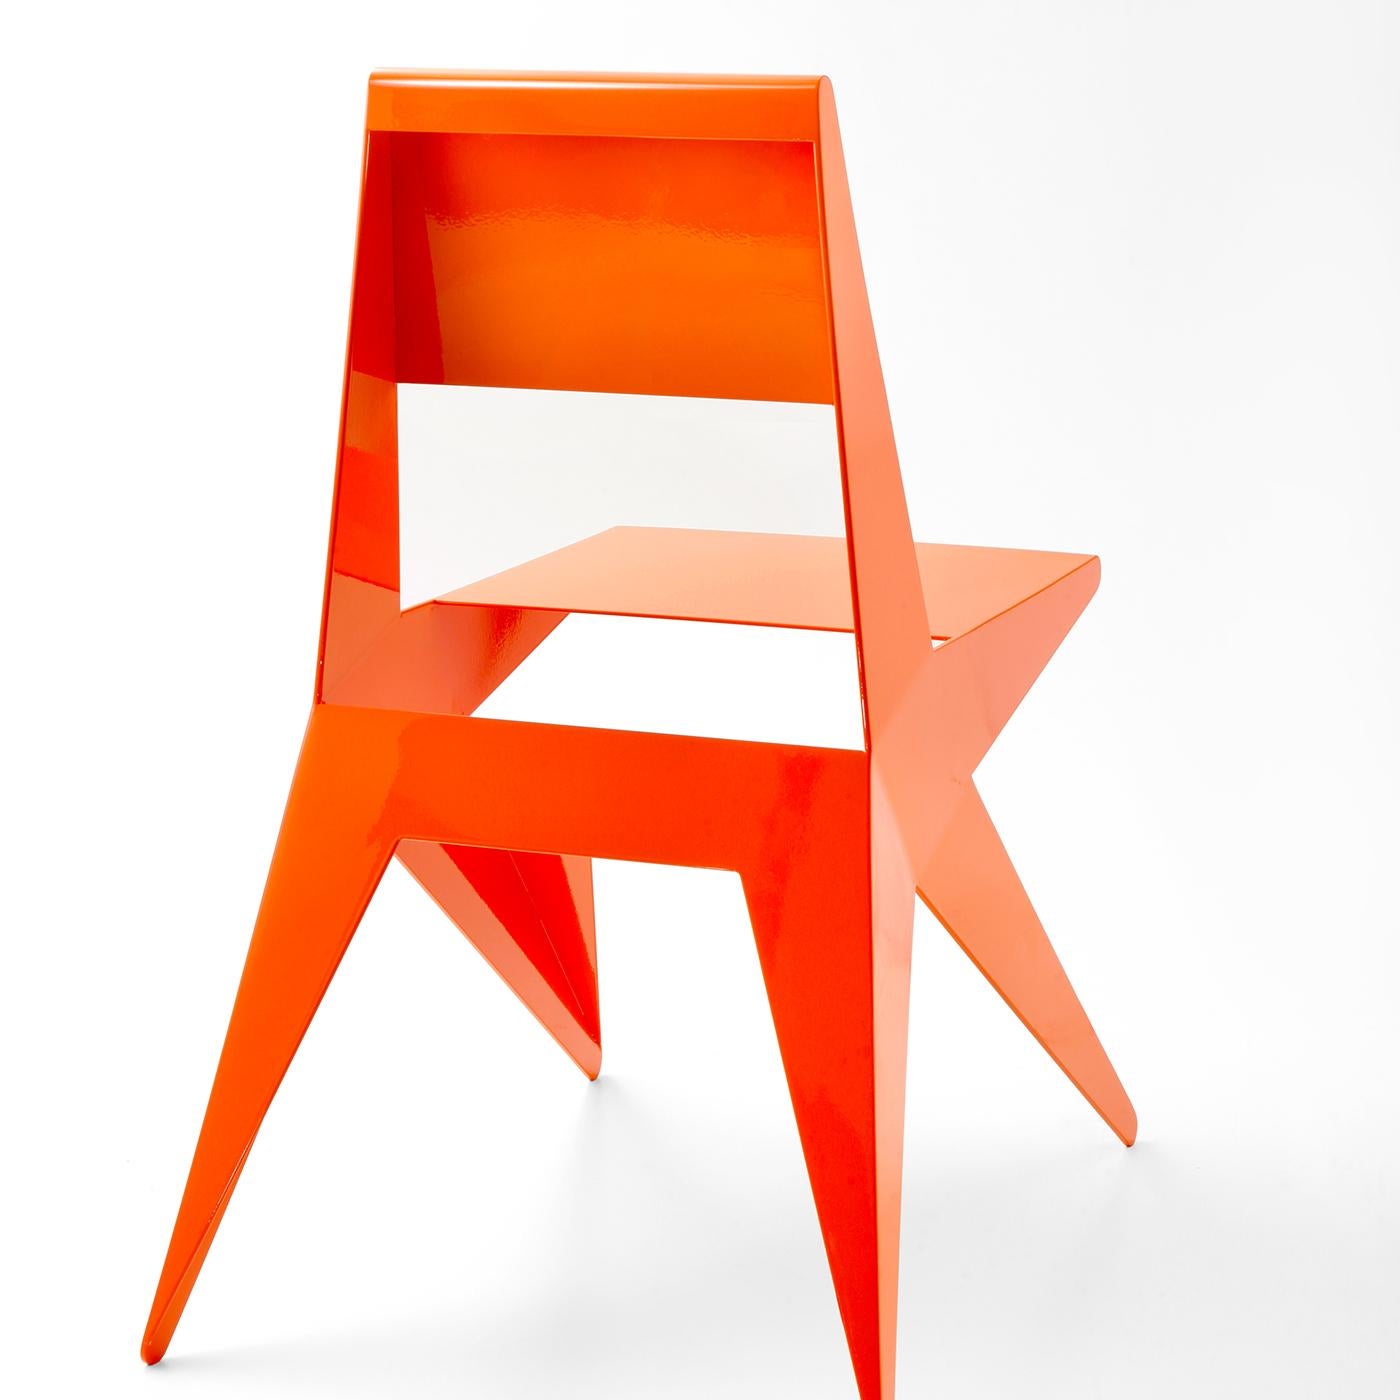 Designed by Antonio Pio Saracino, this chair's geometric profile evokes a three-dimensional star with the points extending from a core to become the legs, seat (H 47 cm), and back. Modern and elegant, this chair is lacquered in a bold orange color